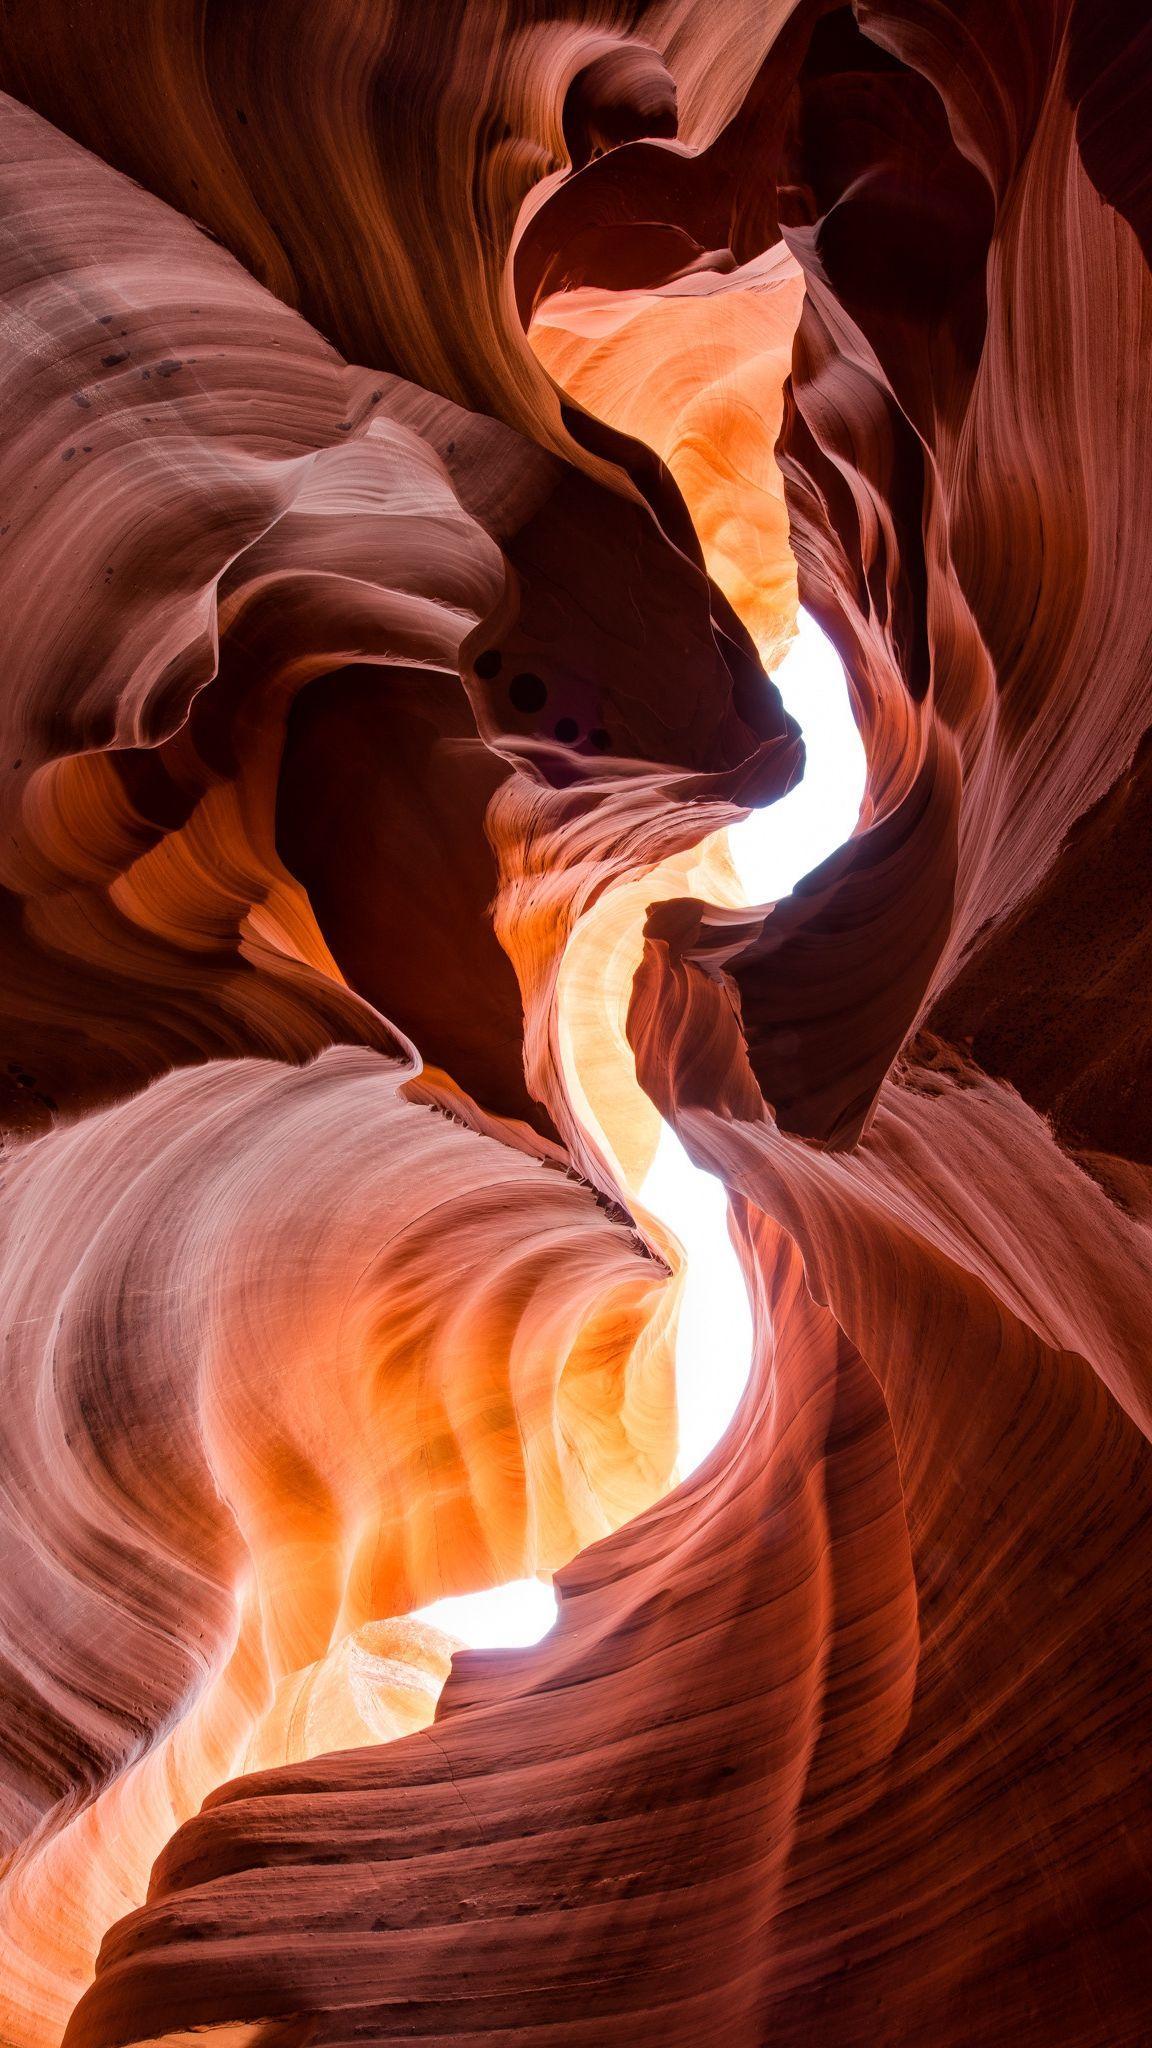 Canyon Rocks IPhone Wallpaper. Abstract Iphone Wallpaper, Live